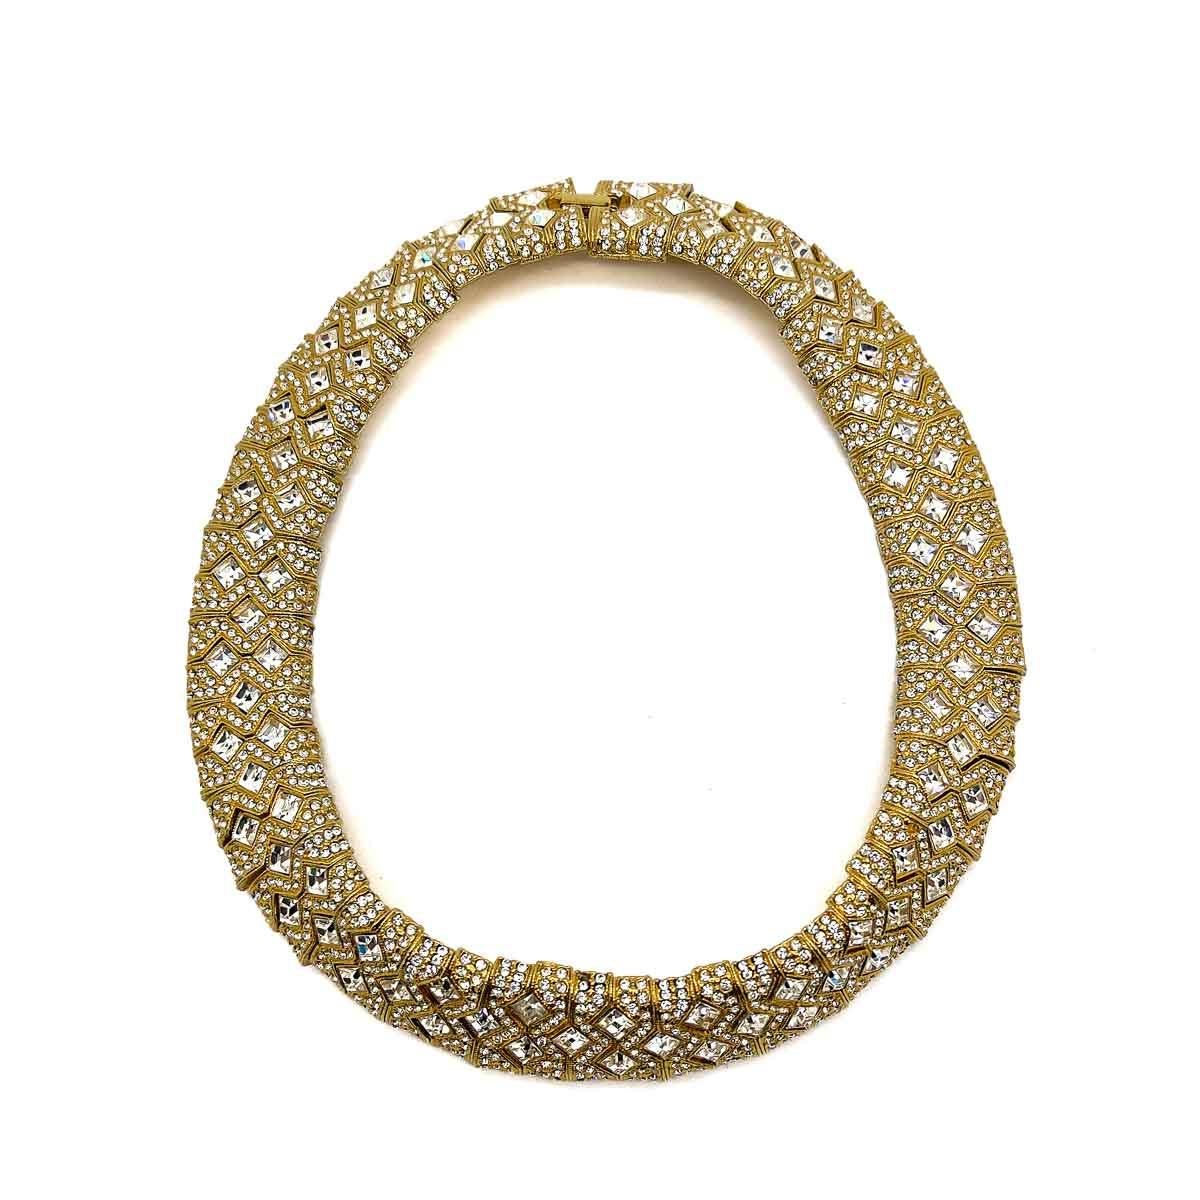 A super glamorous Vintage Square Crystal Collar. A solid chunky collar adorned with  pave set crystals including fancy square cuts and chatons. A perfect forever in style piece that will easily elevate your style every wear.
An unsigned beauty. A